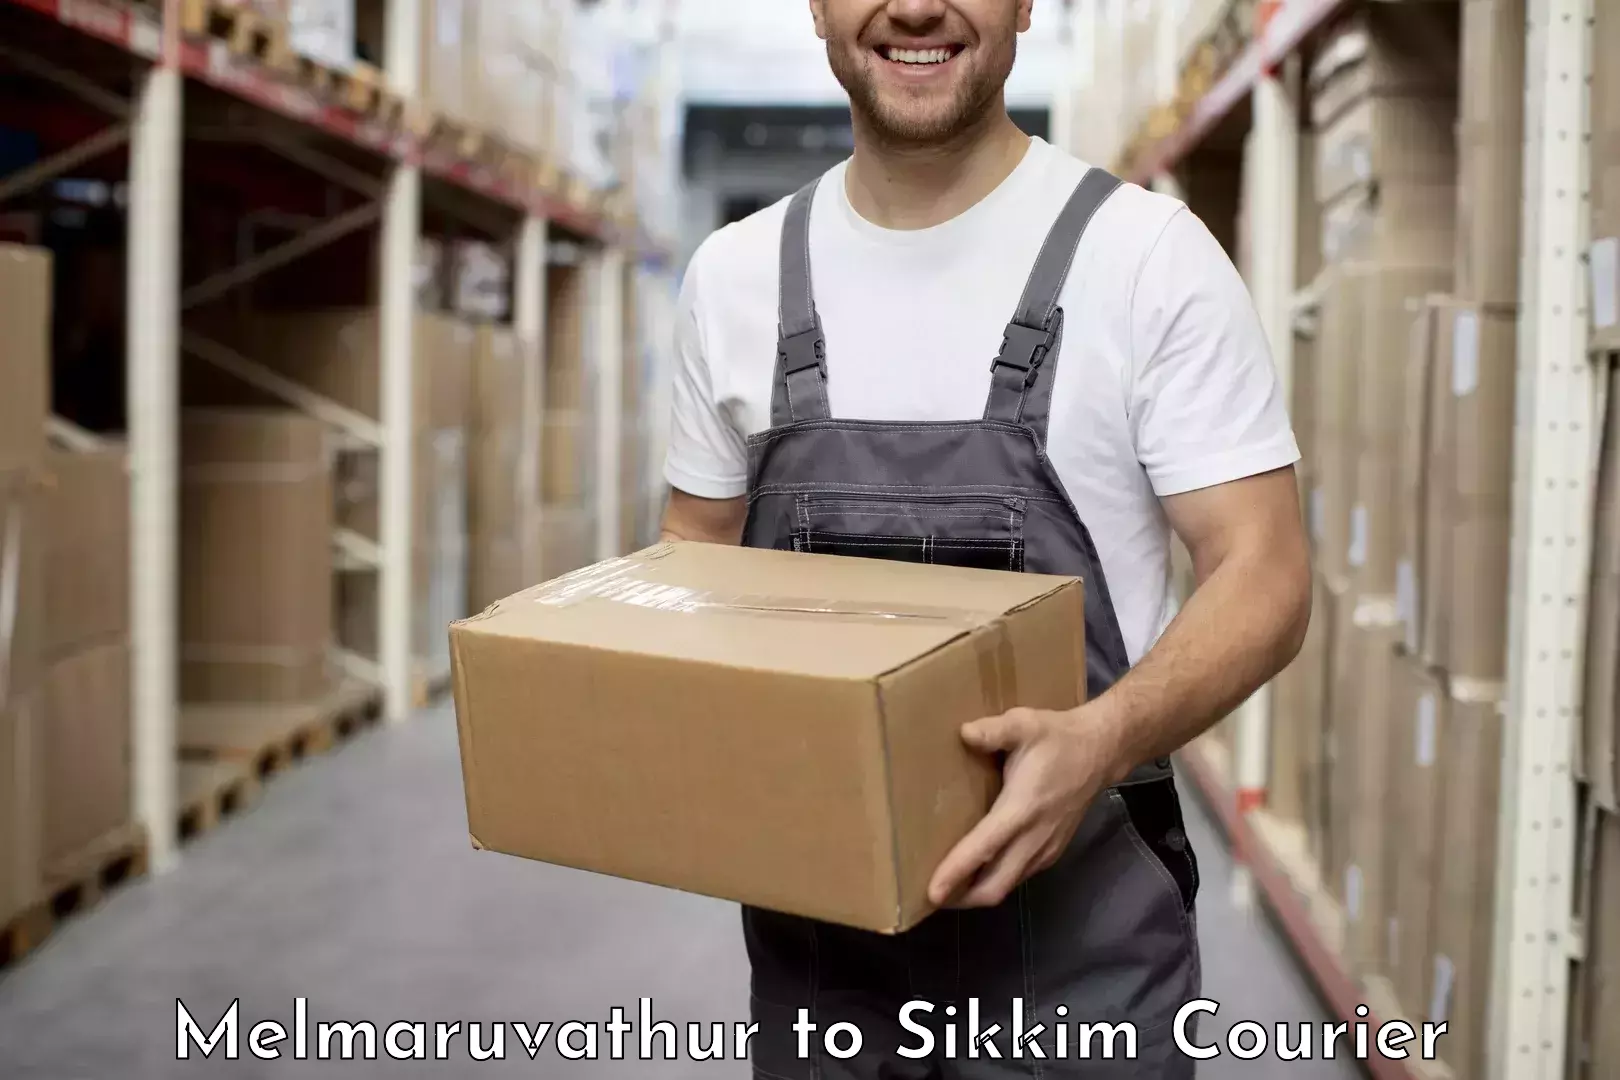 Professional courier handling Melmaruvathur to Pelling